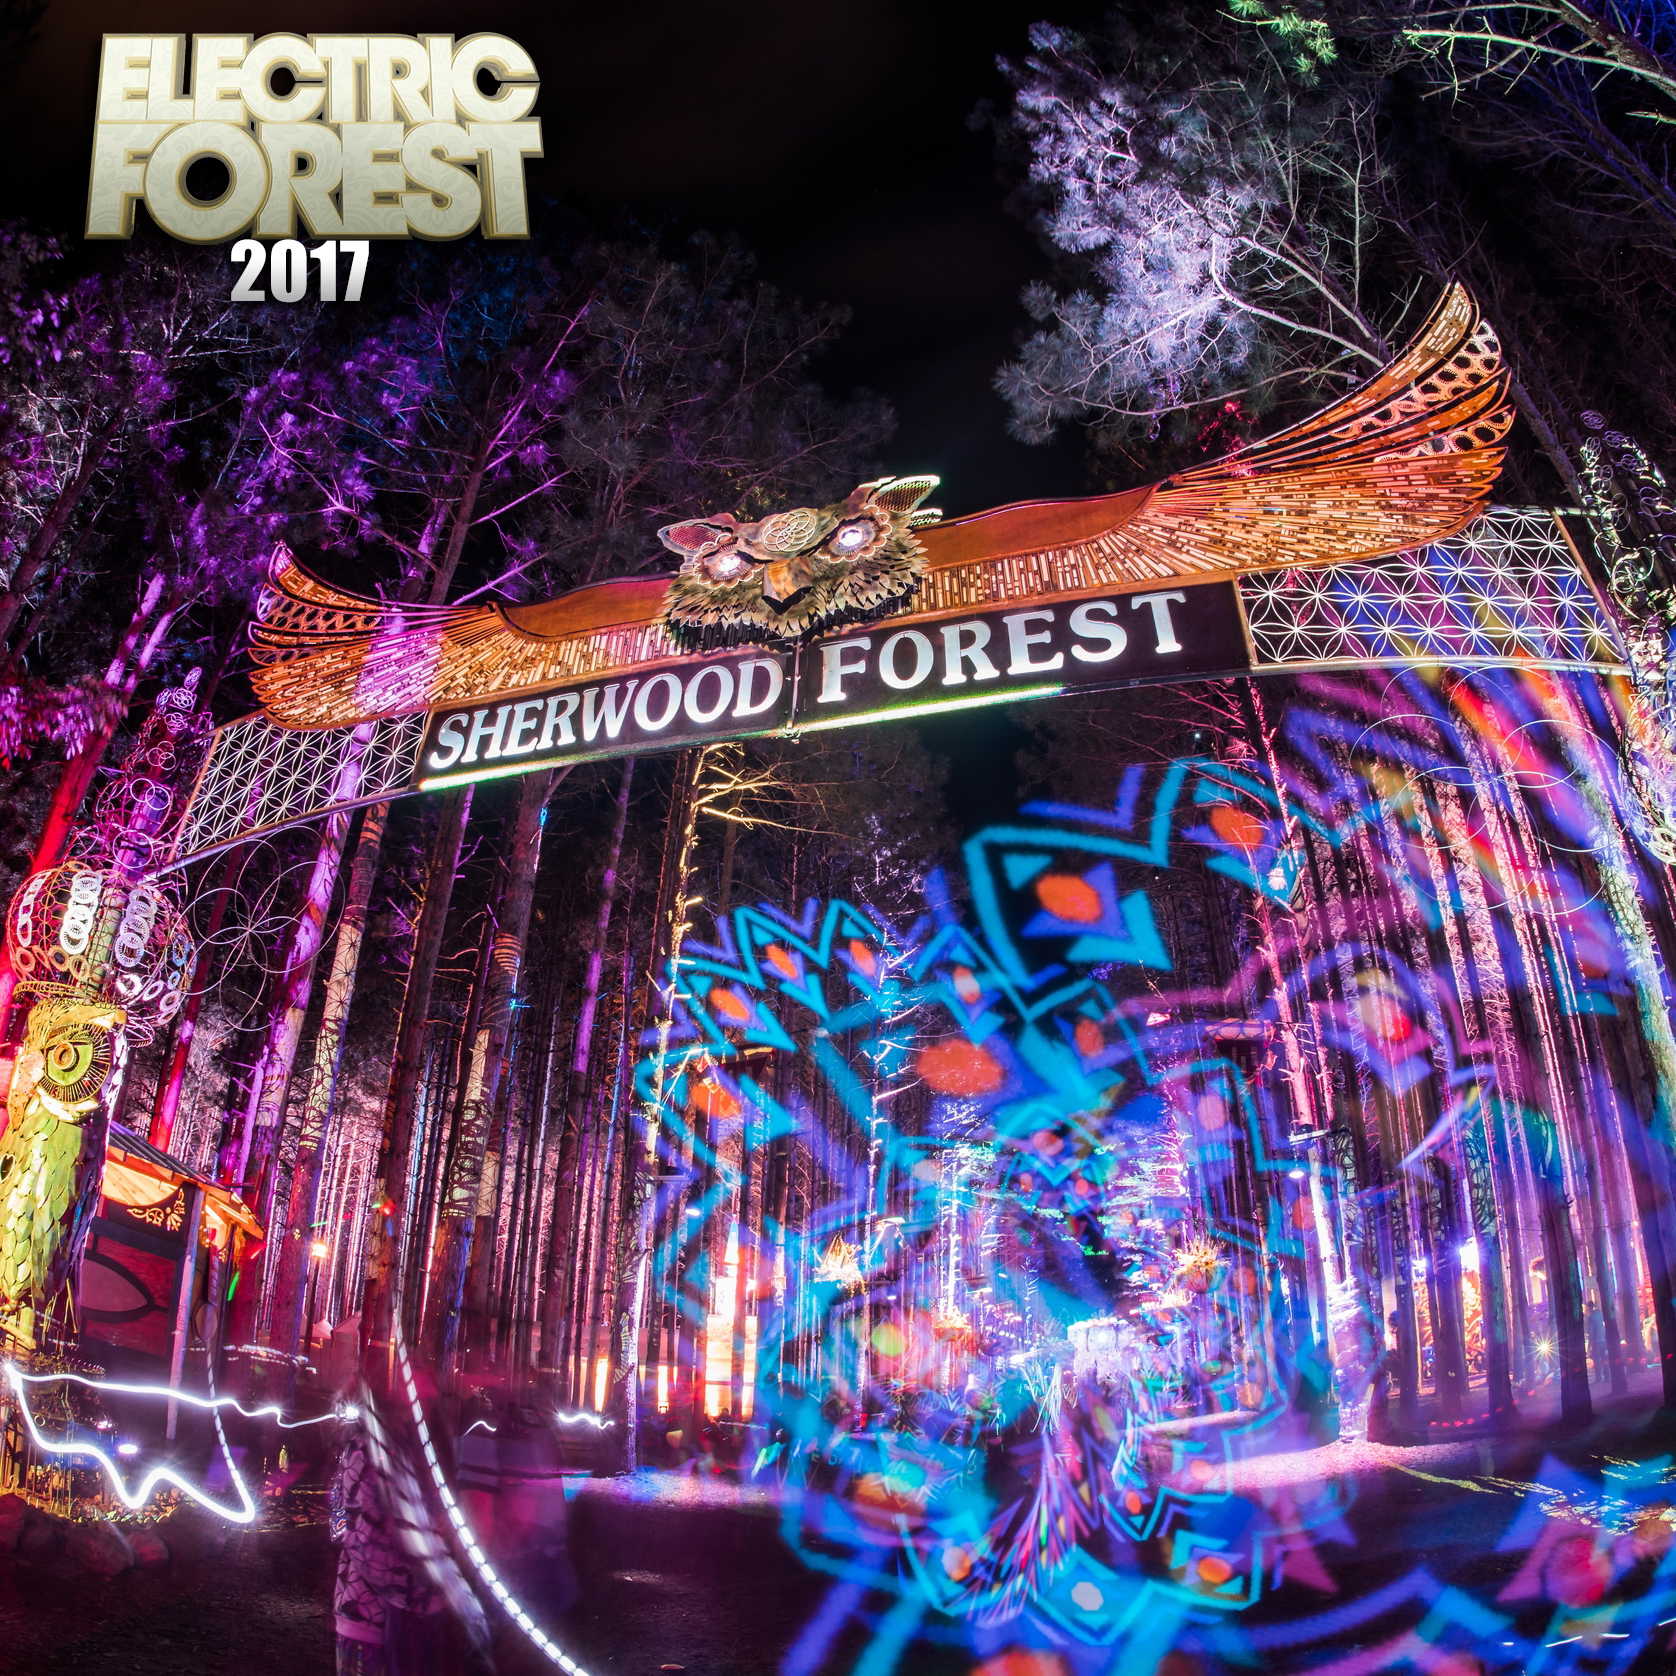 ELECTRIC FOREST 2017